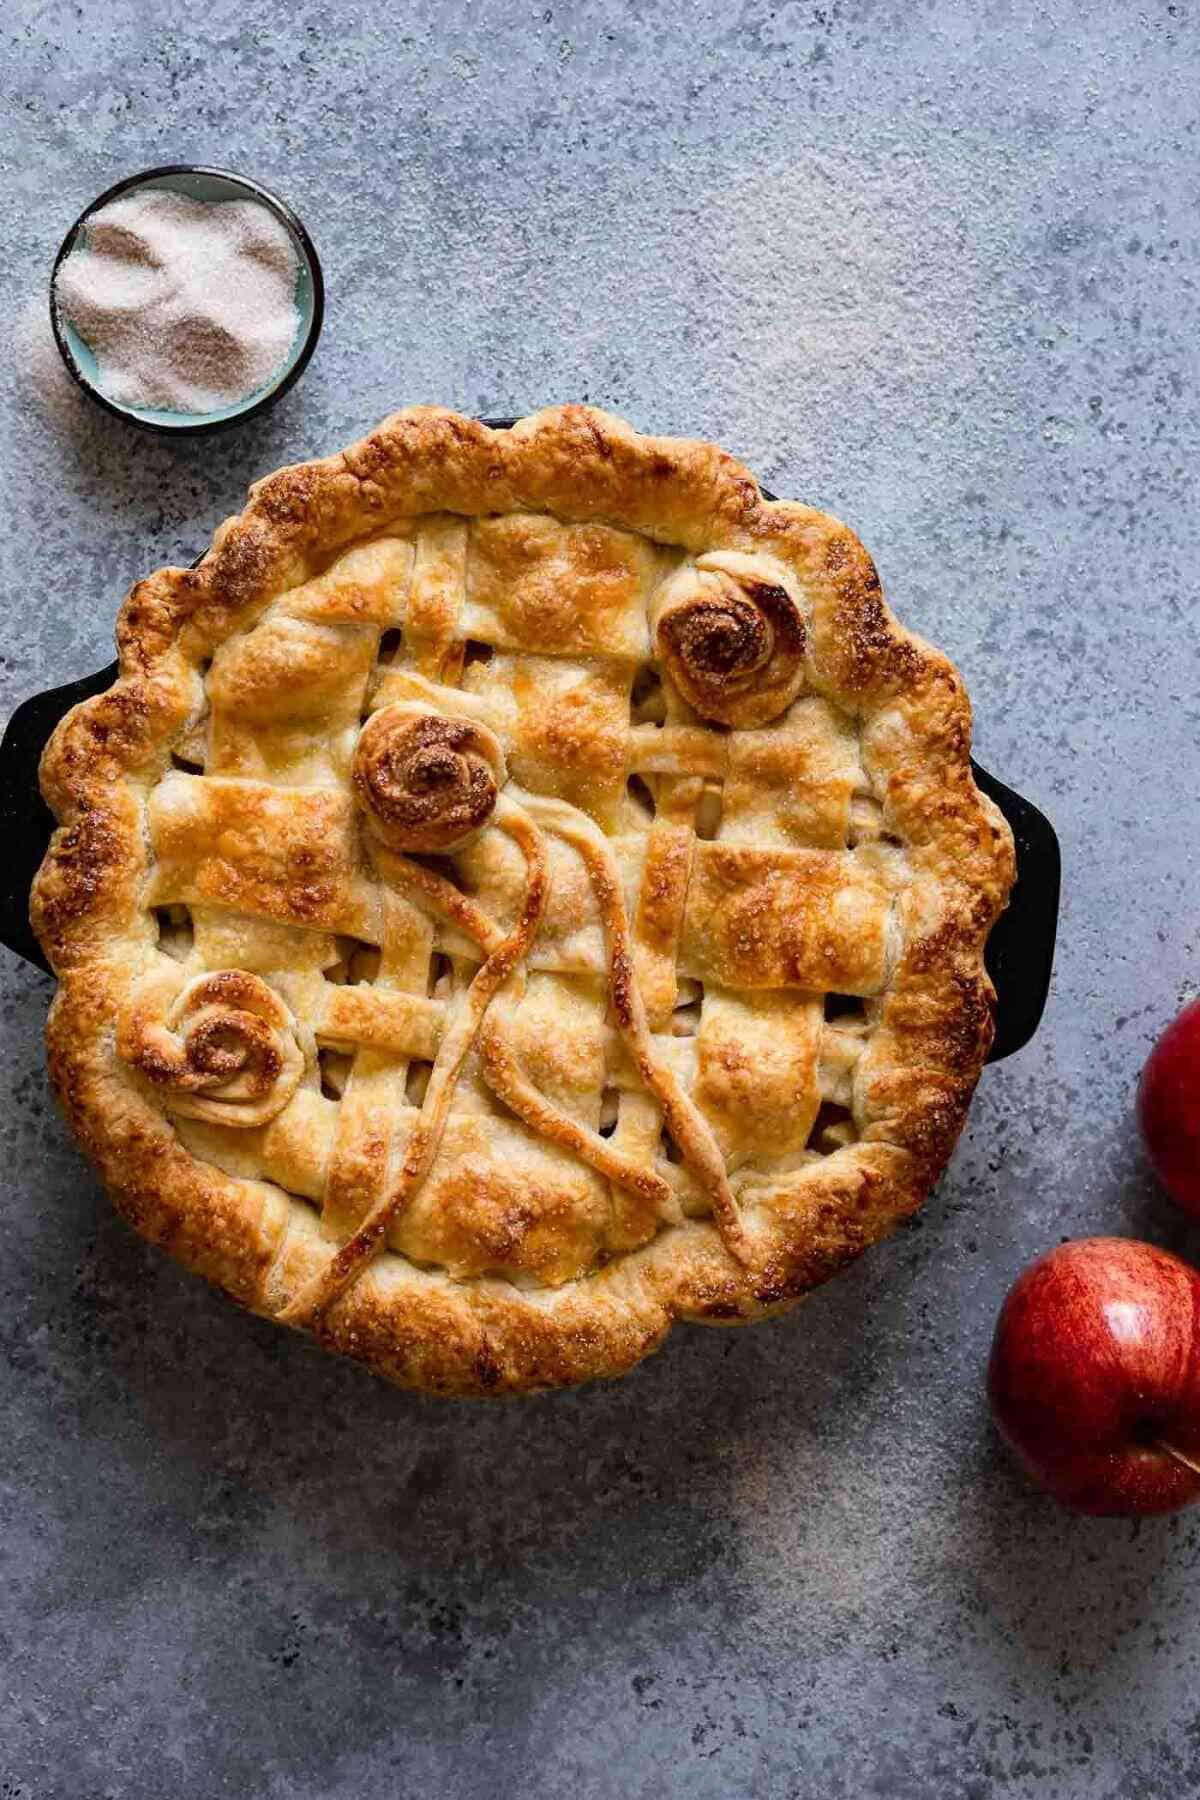 Decorative picture of apple pie sitting on counter